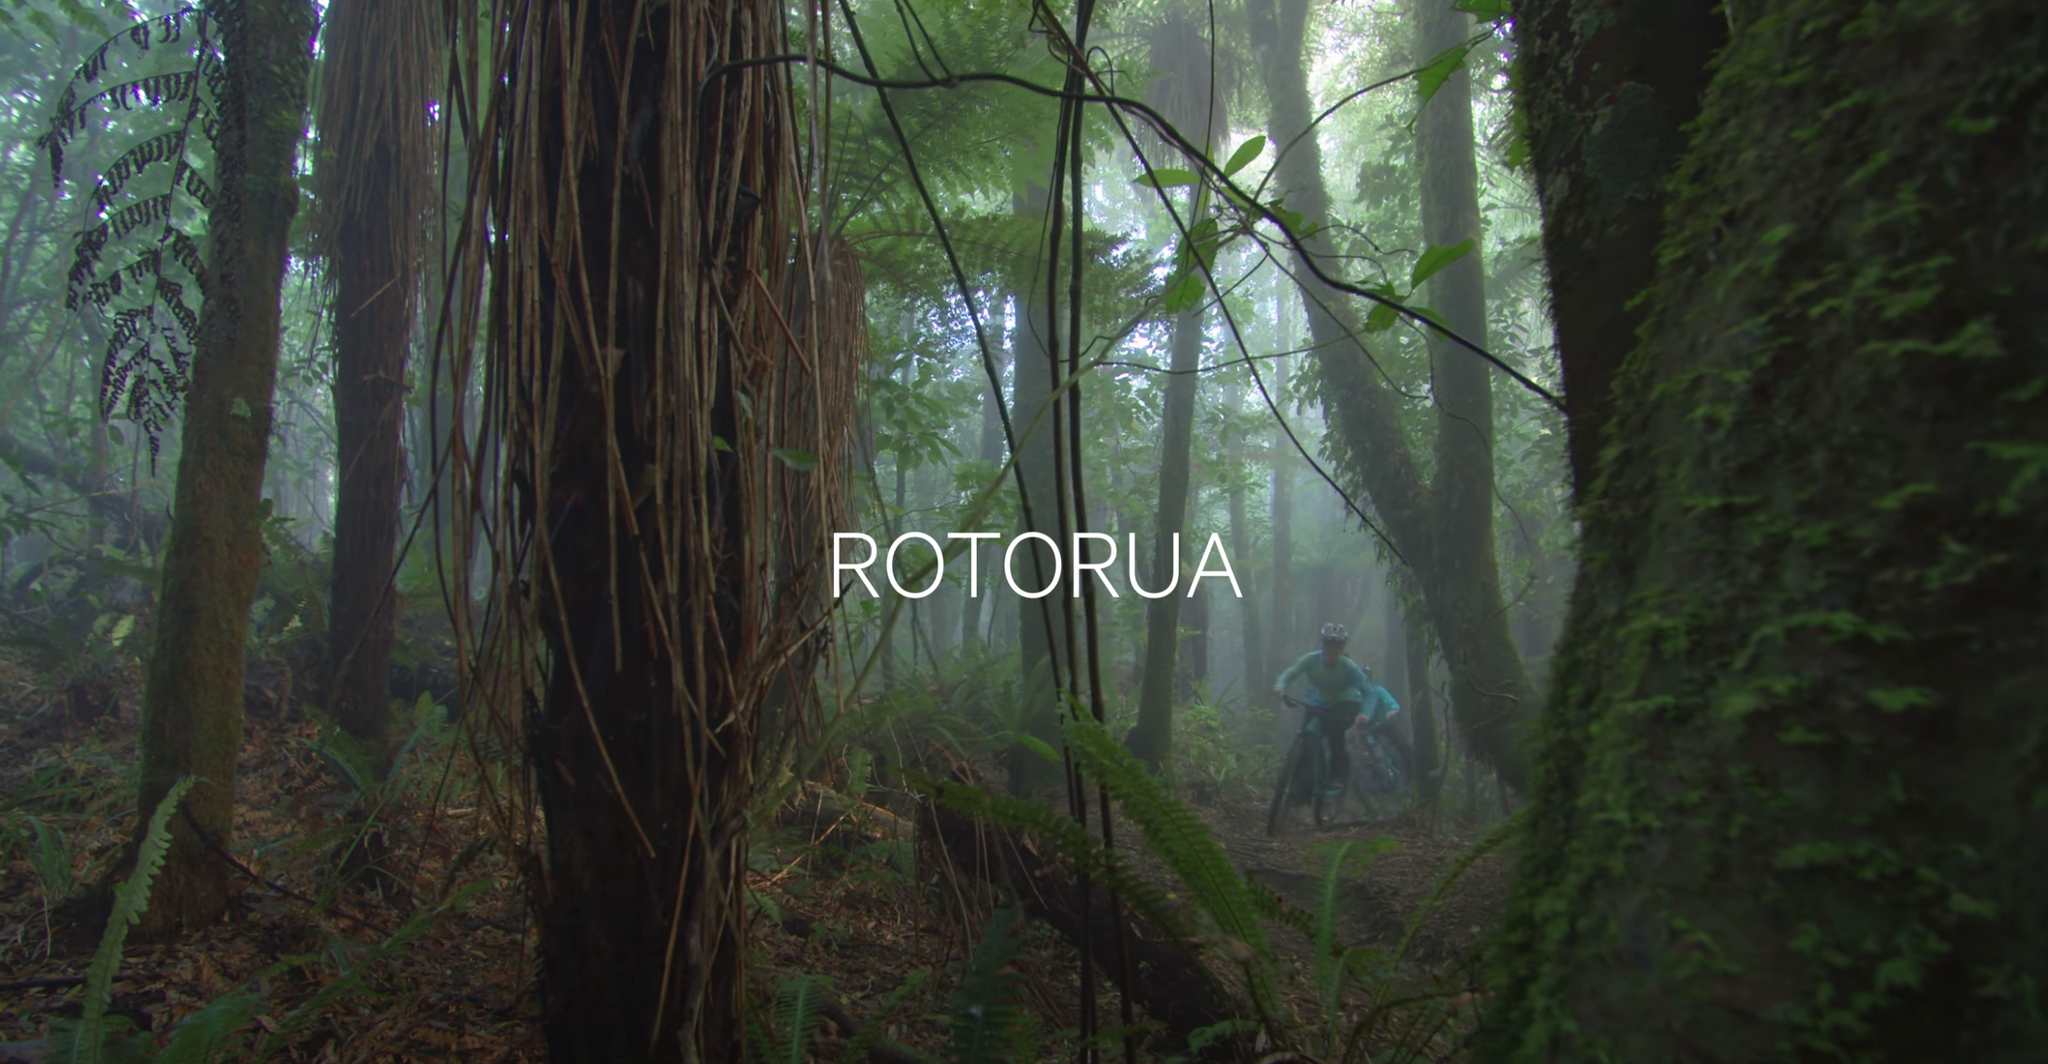 We have now moved to Rotorua